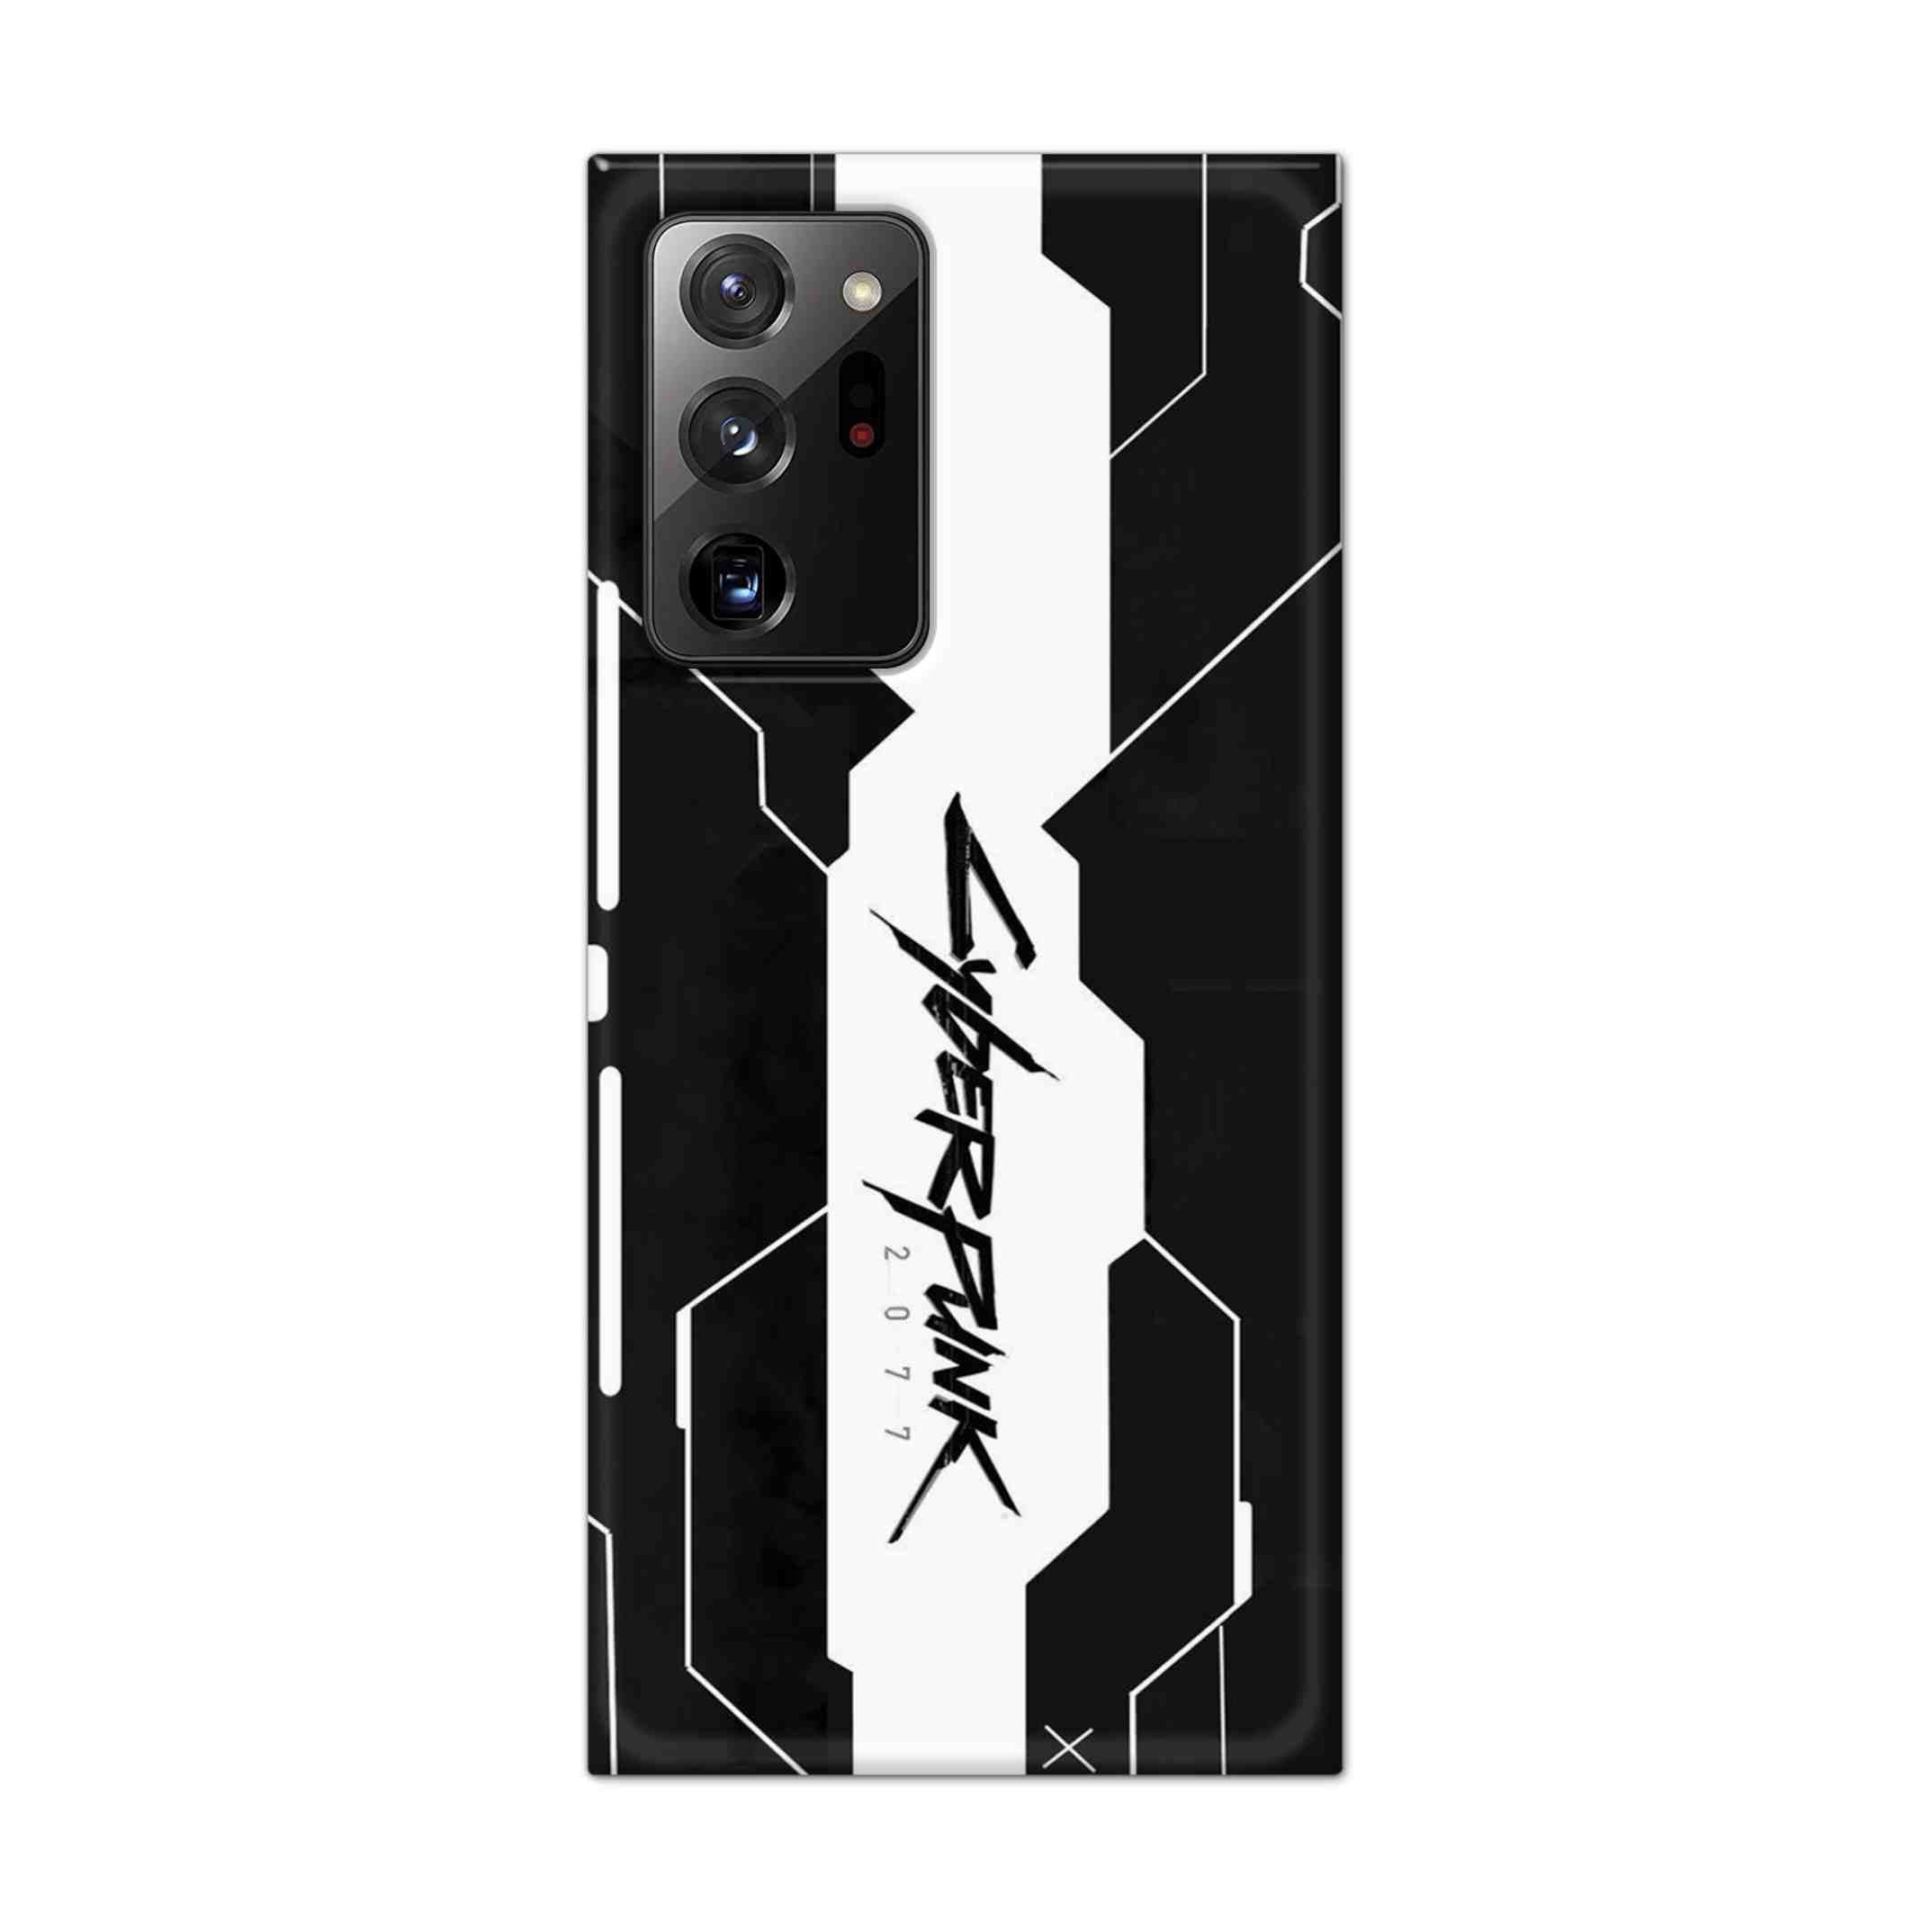 Buy Cyberpunk 2077 Art Hard Back Mobile Phone Case Cover For Samsung Galaxy Note 20 Ultra Online